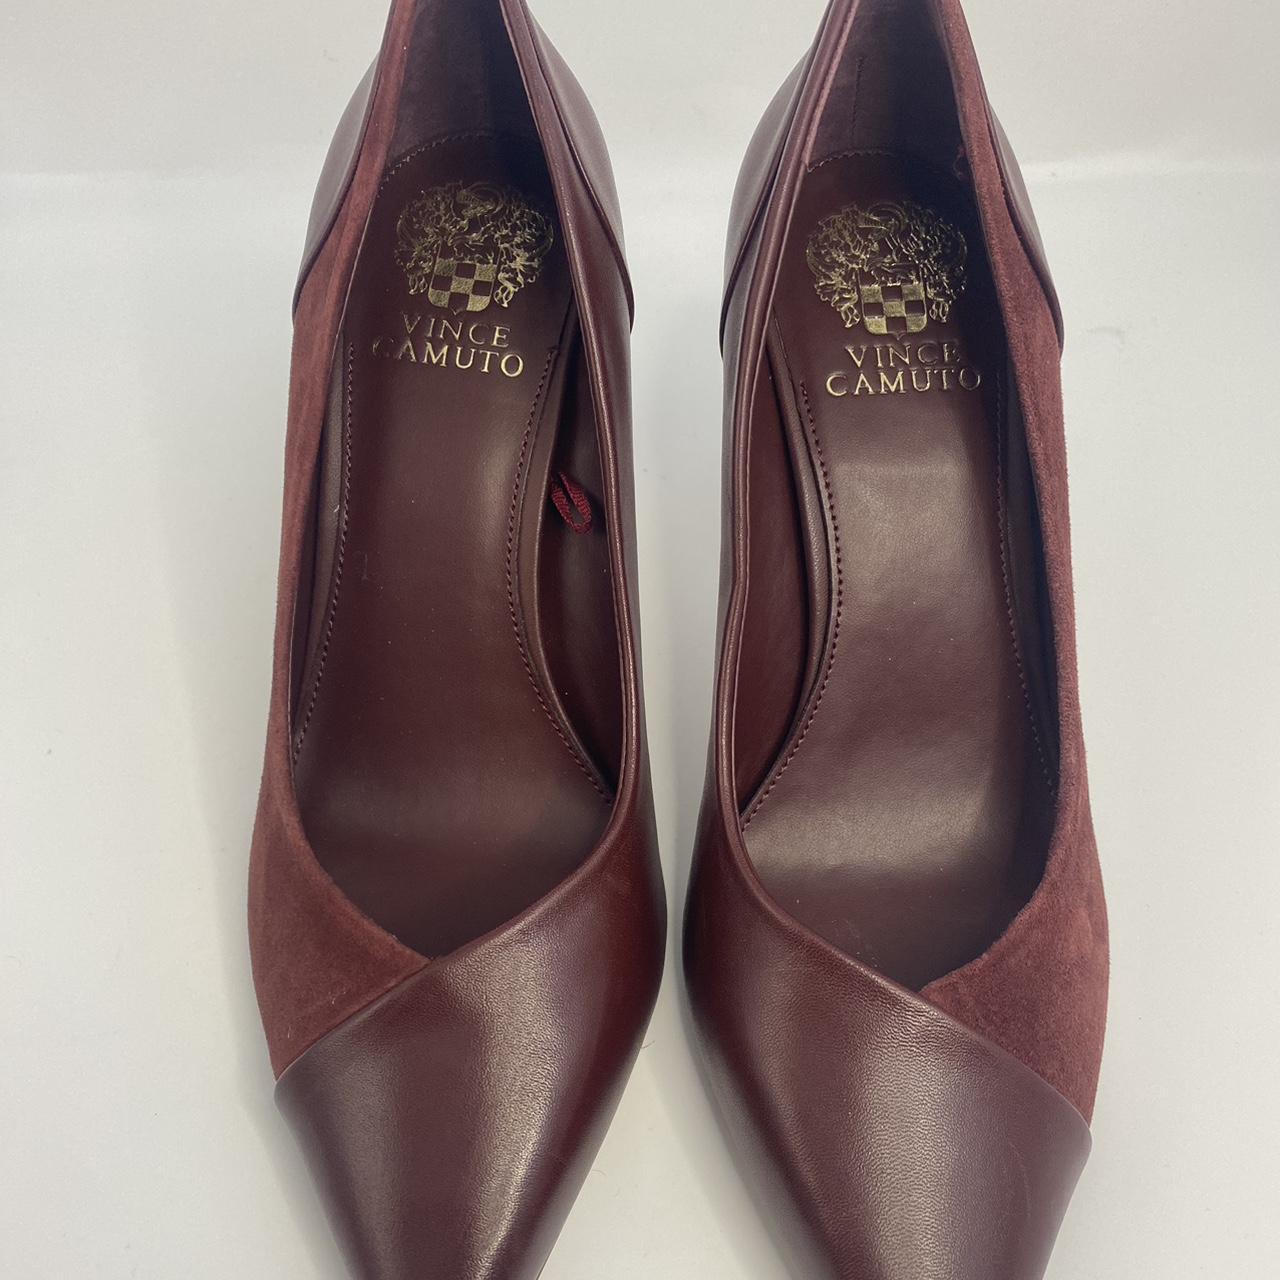 Vince Camuto Suede and Leather Heels -Size